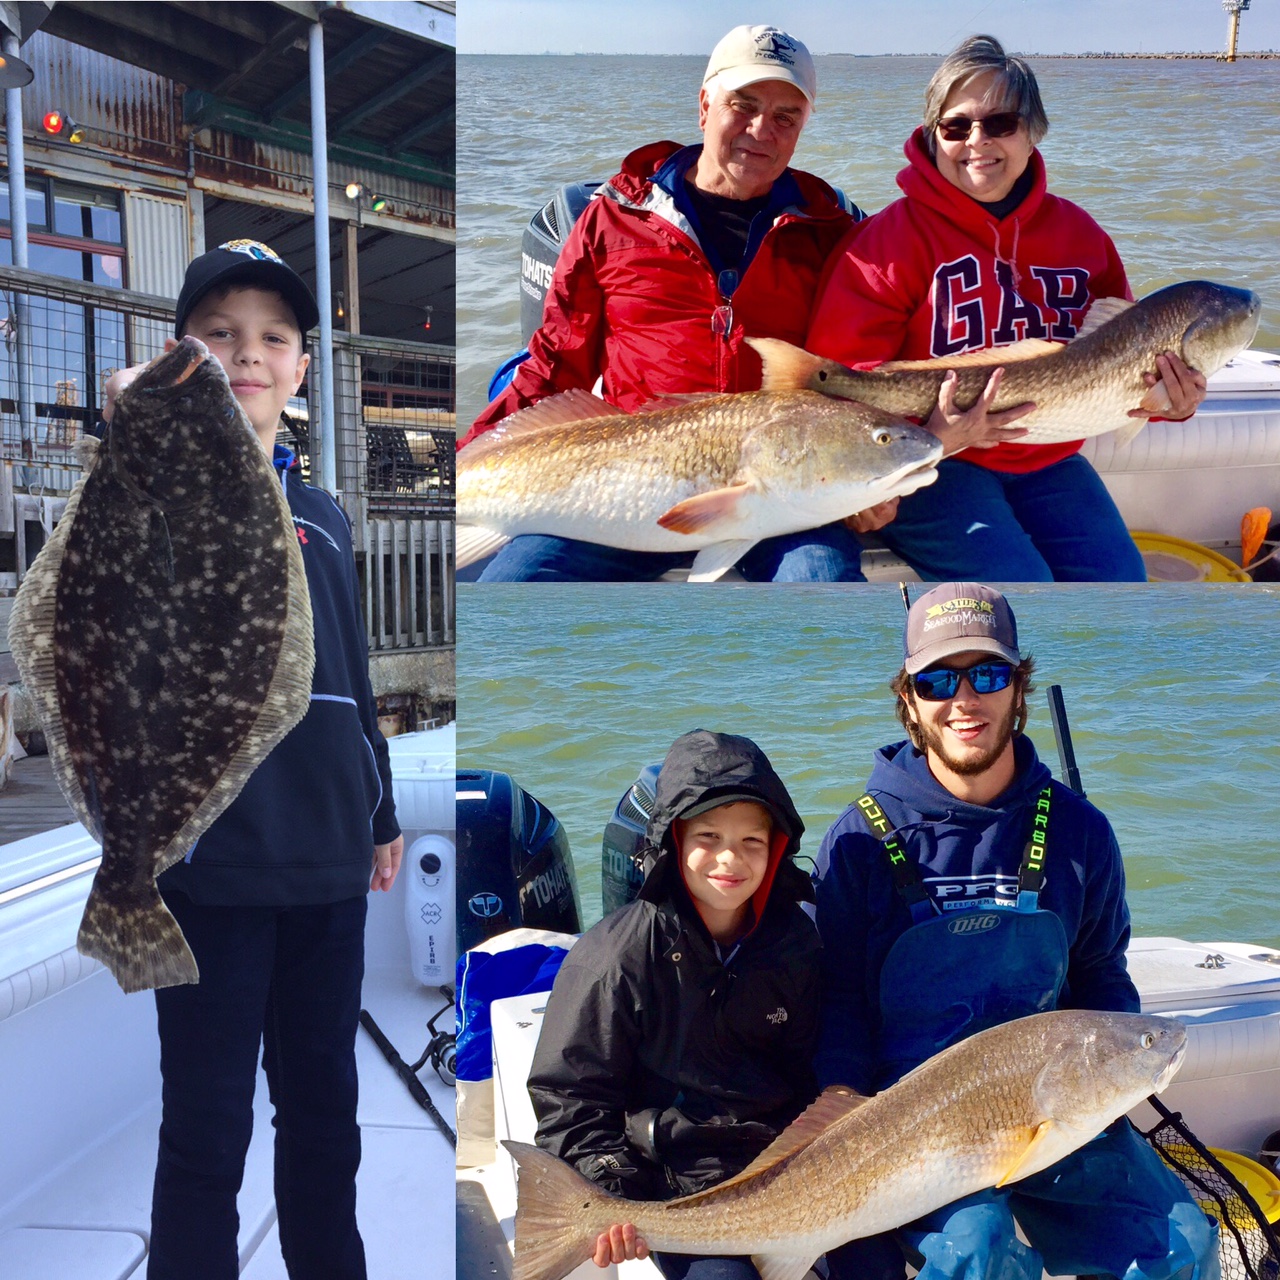 The 15 Best Bottom Fishing Charters in Galveston Bay